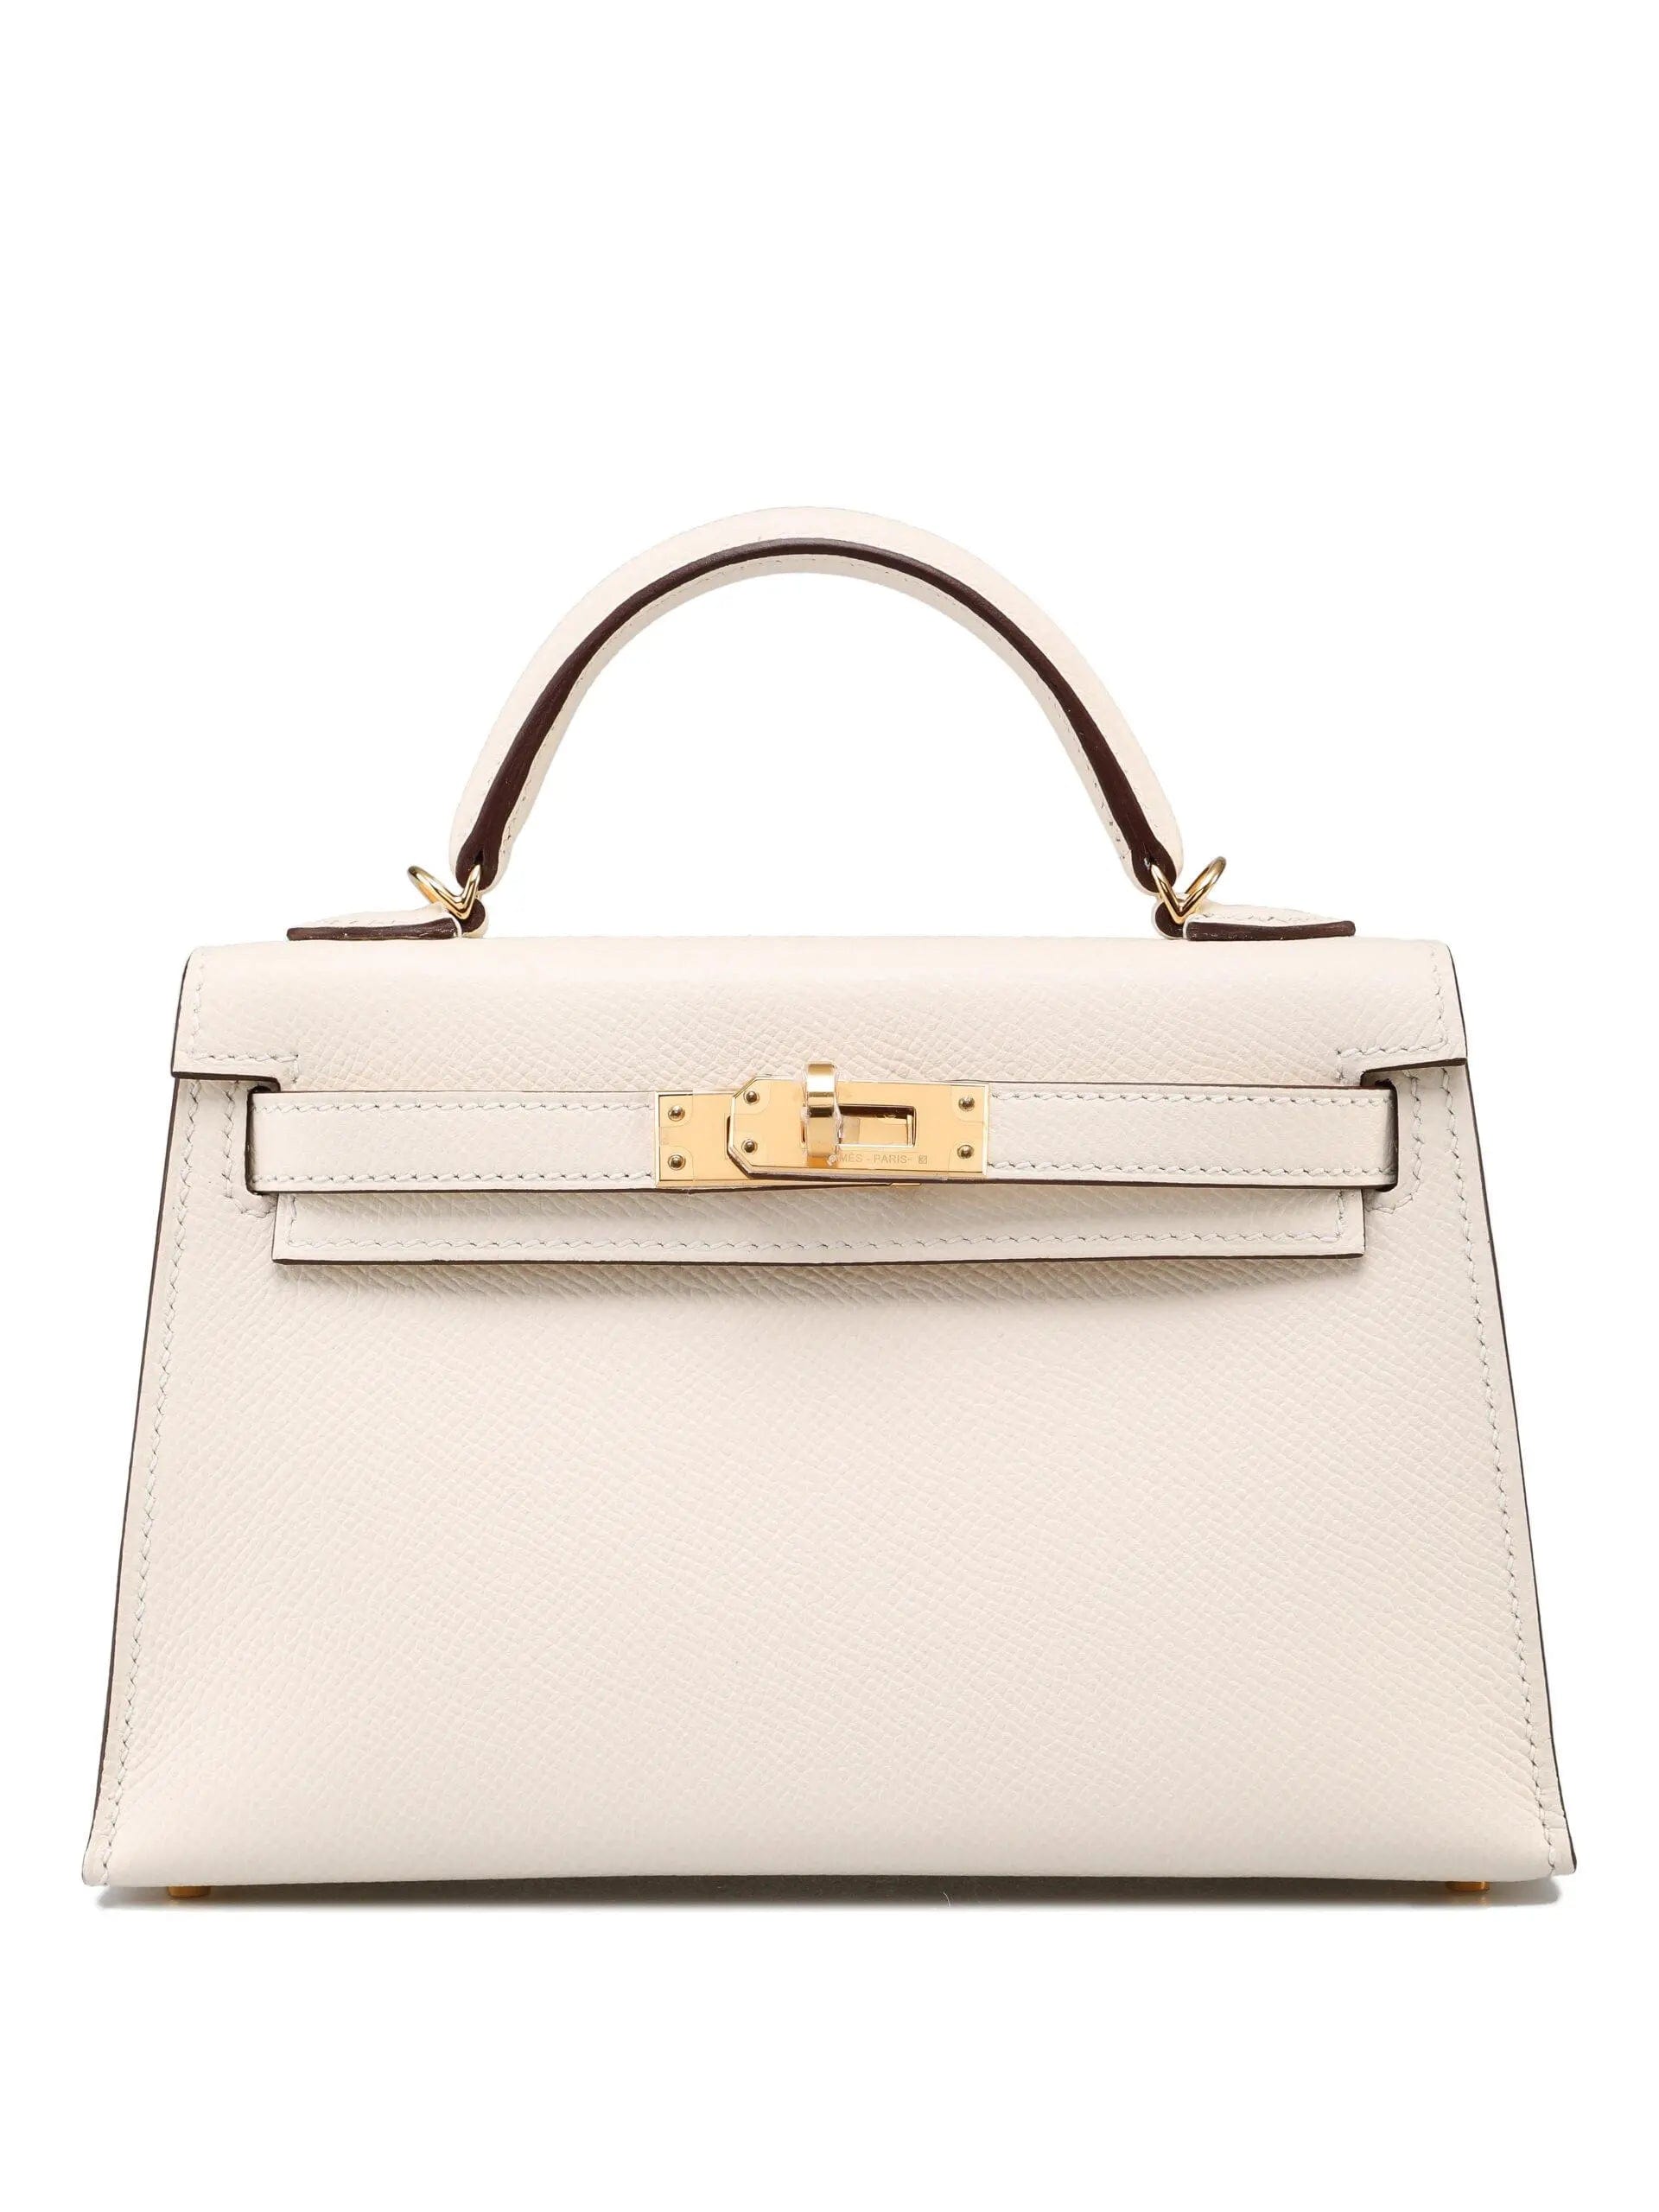 Hermes Kelly Sellier 20 Tri-color Gold, Black and Nata Epsom Palladium –  Madison Avenue Couture